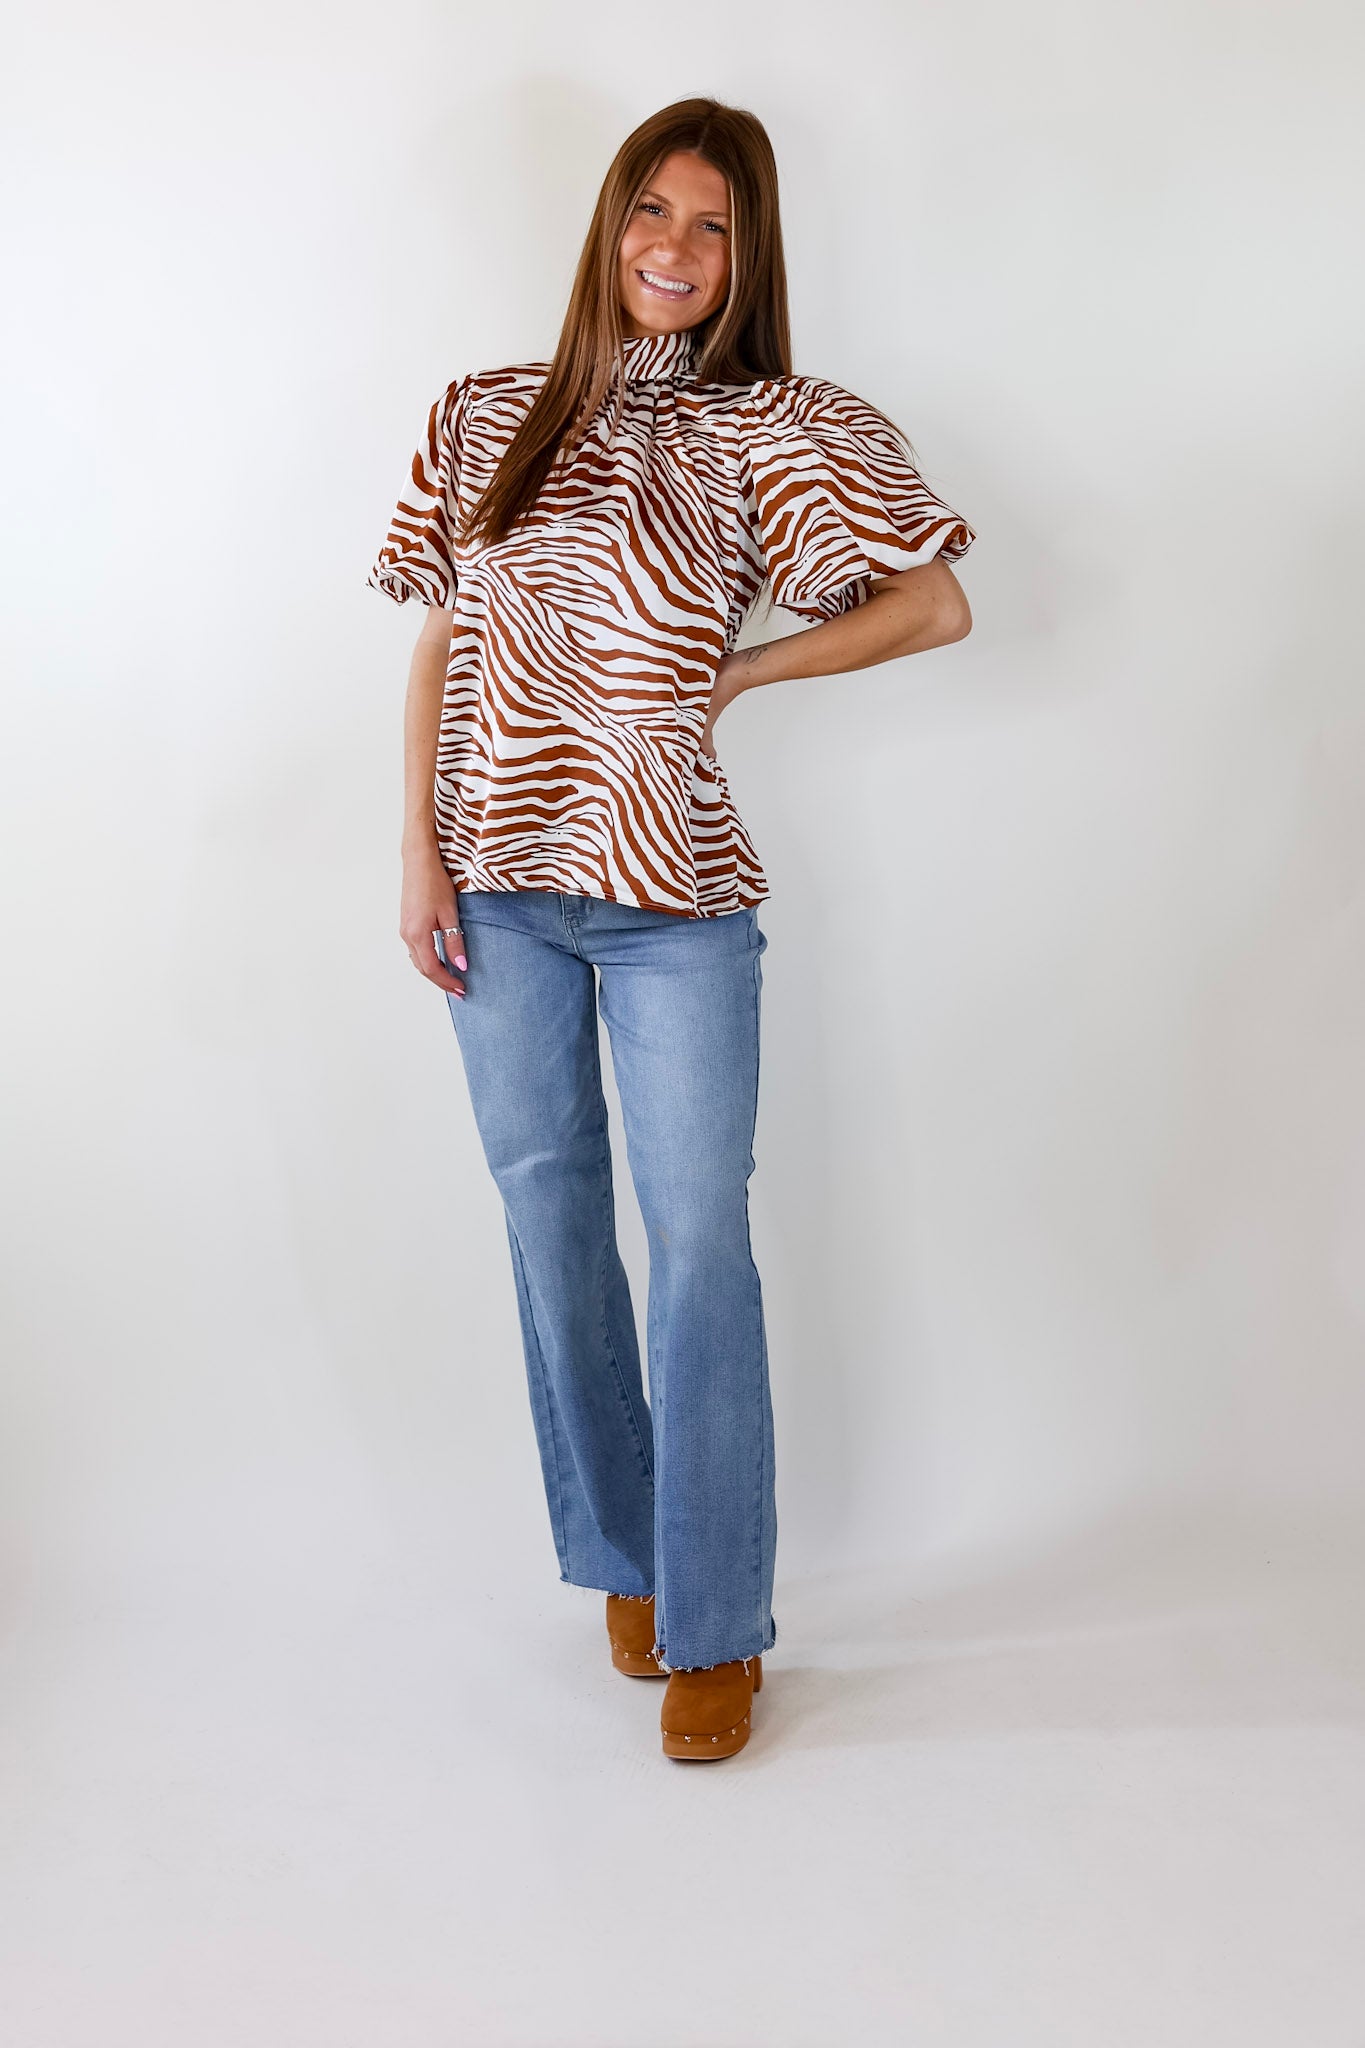 Rival Flair Zebra Print Top with Mock Neck in Ginger and White - Giddy Up Glamour Boutique